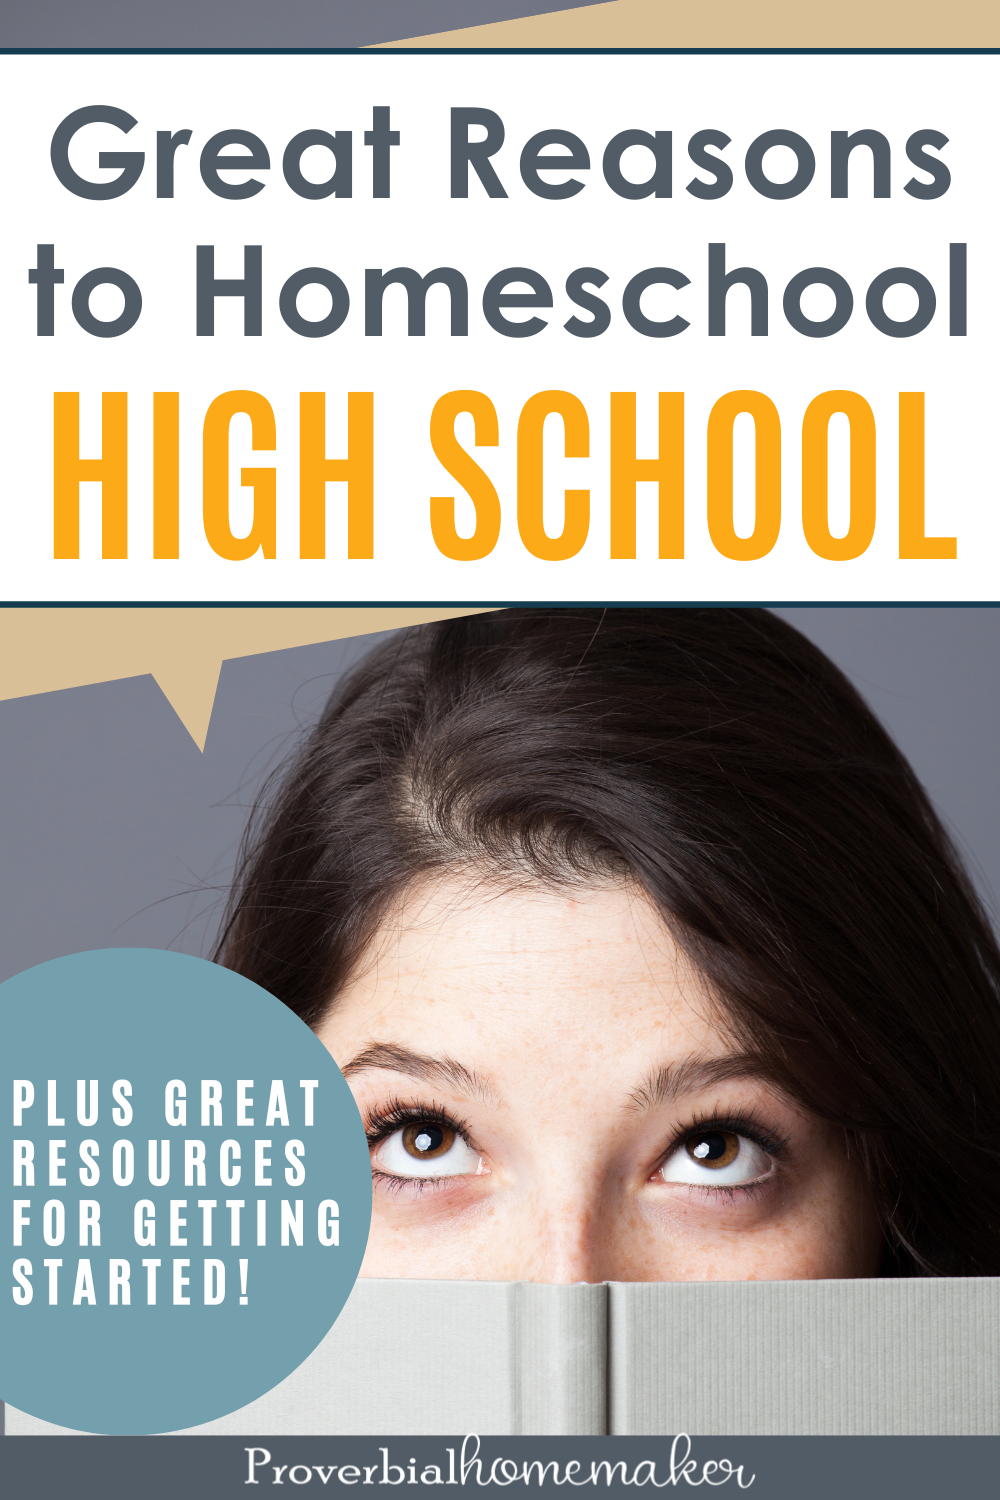 15 great reasons for why its a wonderful idea to homeschool high school! (Plus helpful resources to explore as you get started.)